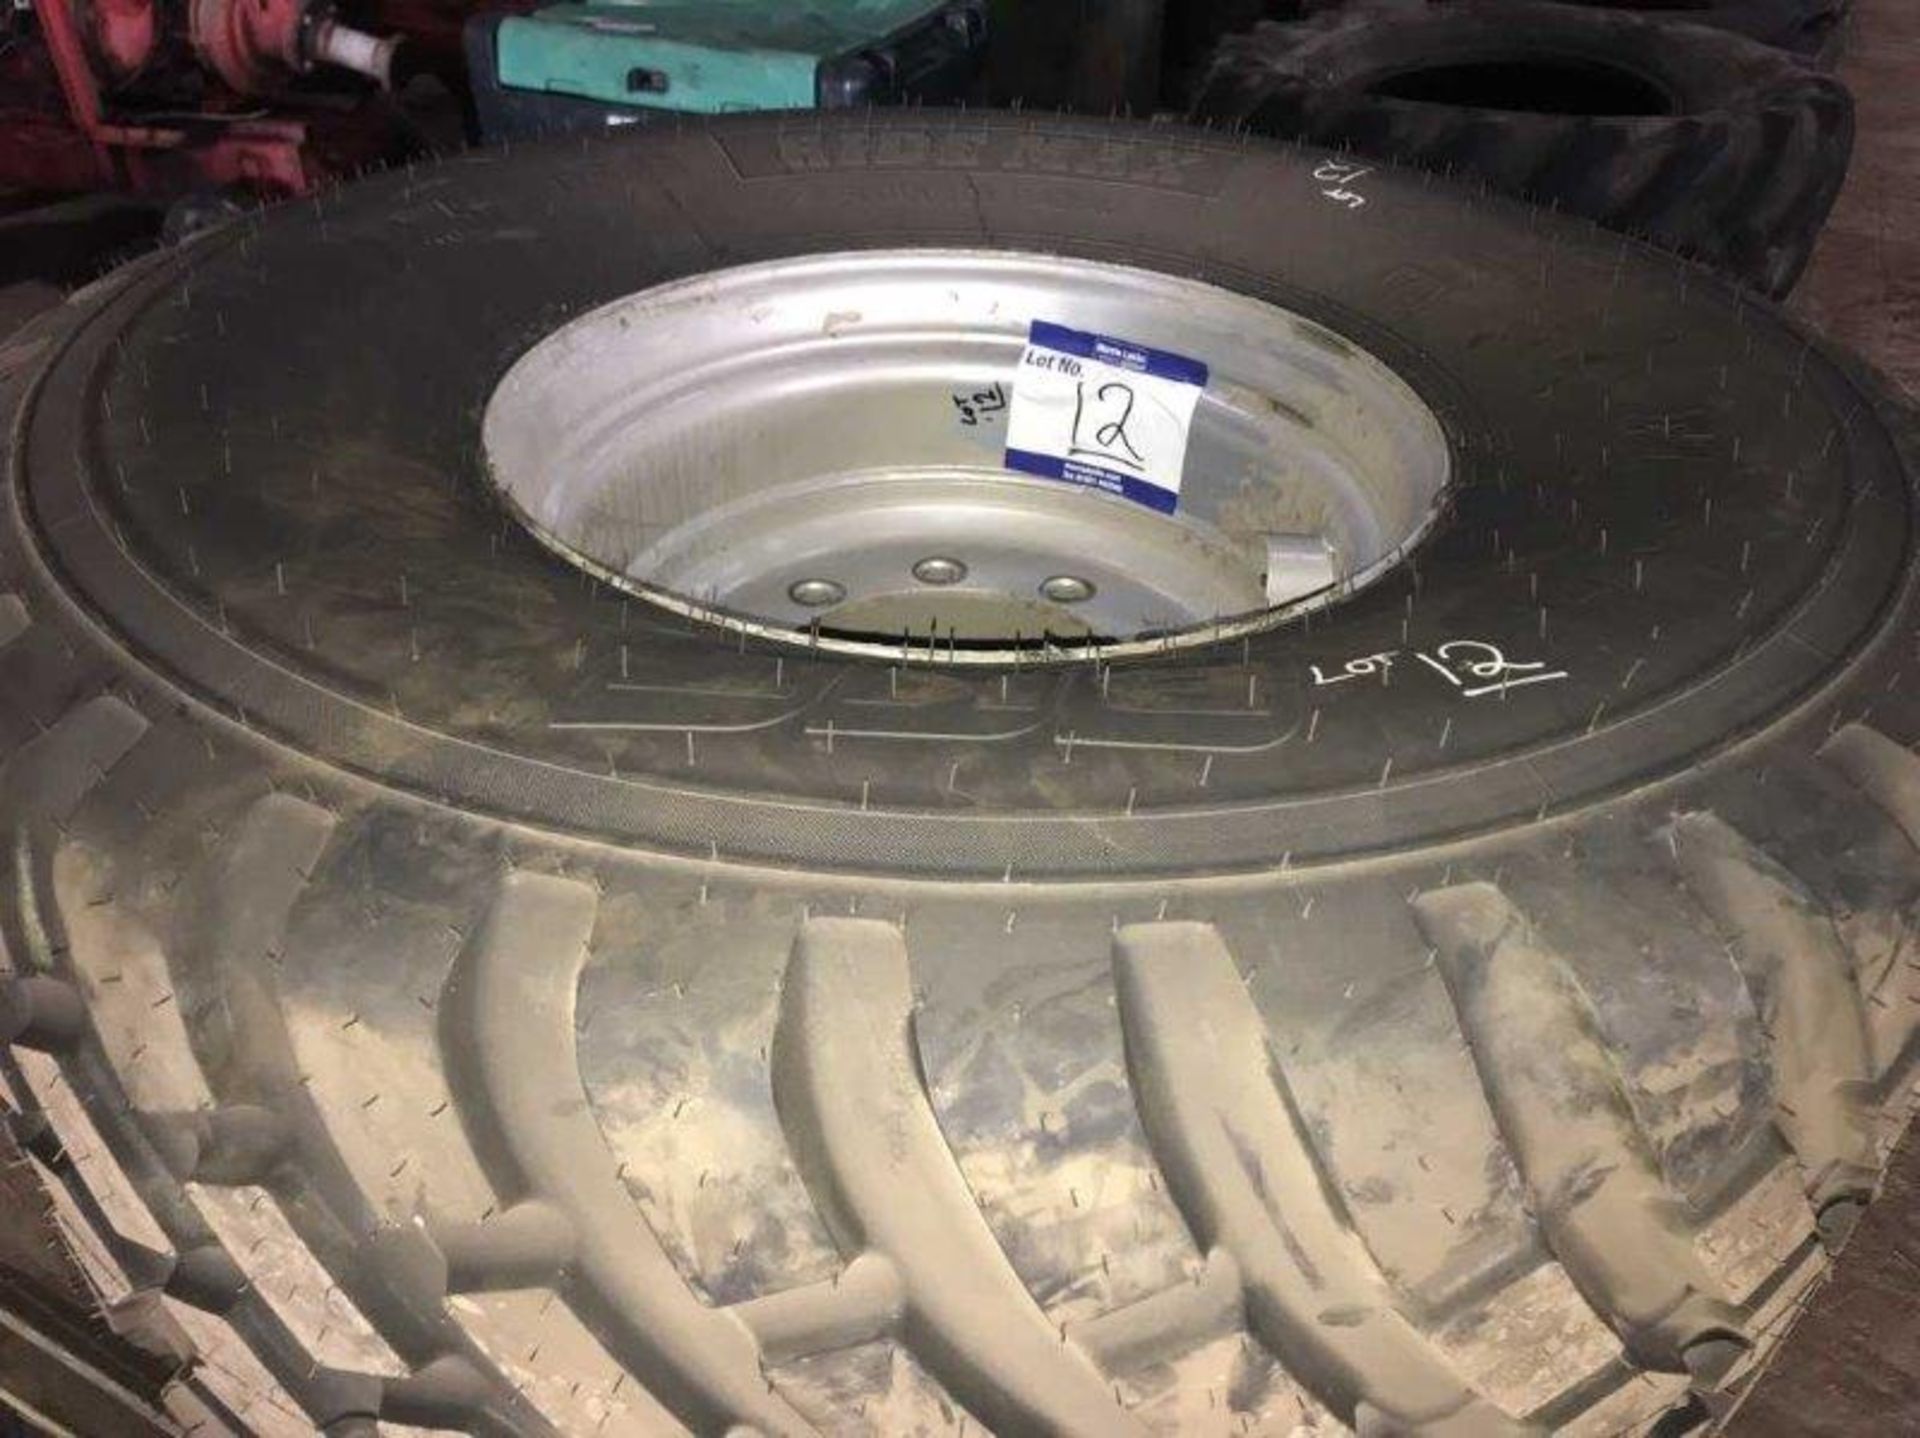 1 X BRAND NEW 560/60R 22.5 FLOTATION TYRE AND RIM 1 X USED 560/60R 22.5 FLOTATION TYRE AND RIM - Image 2 of 3